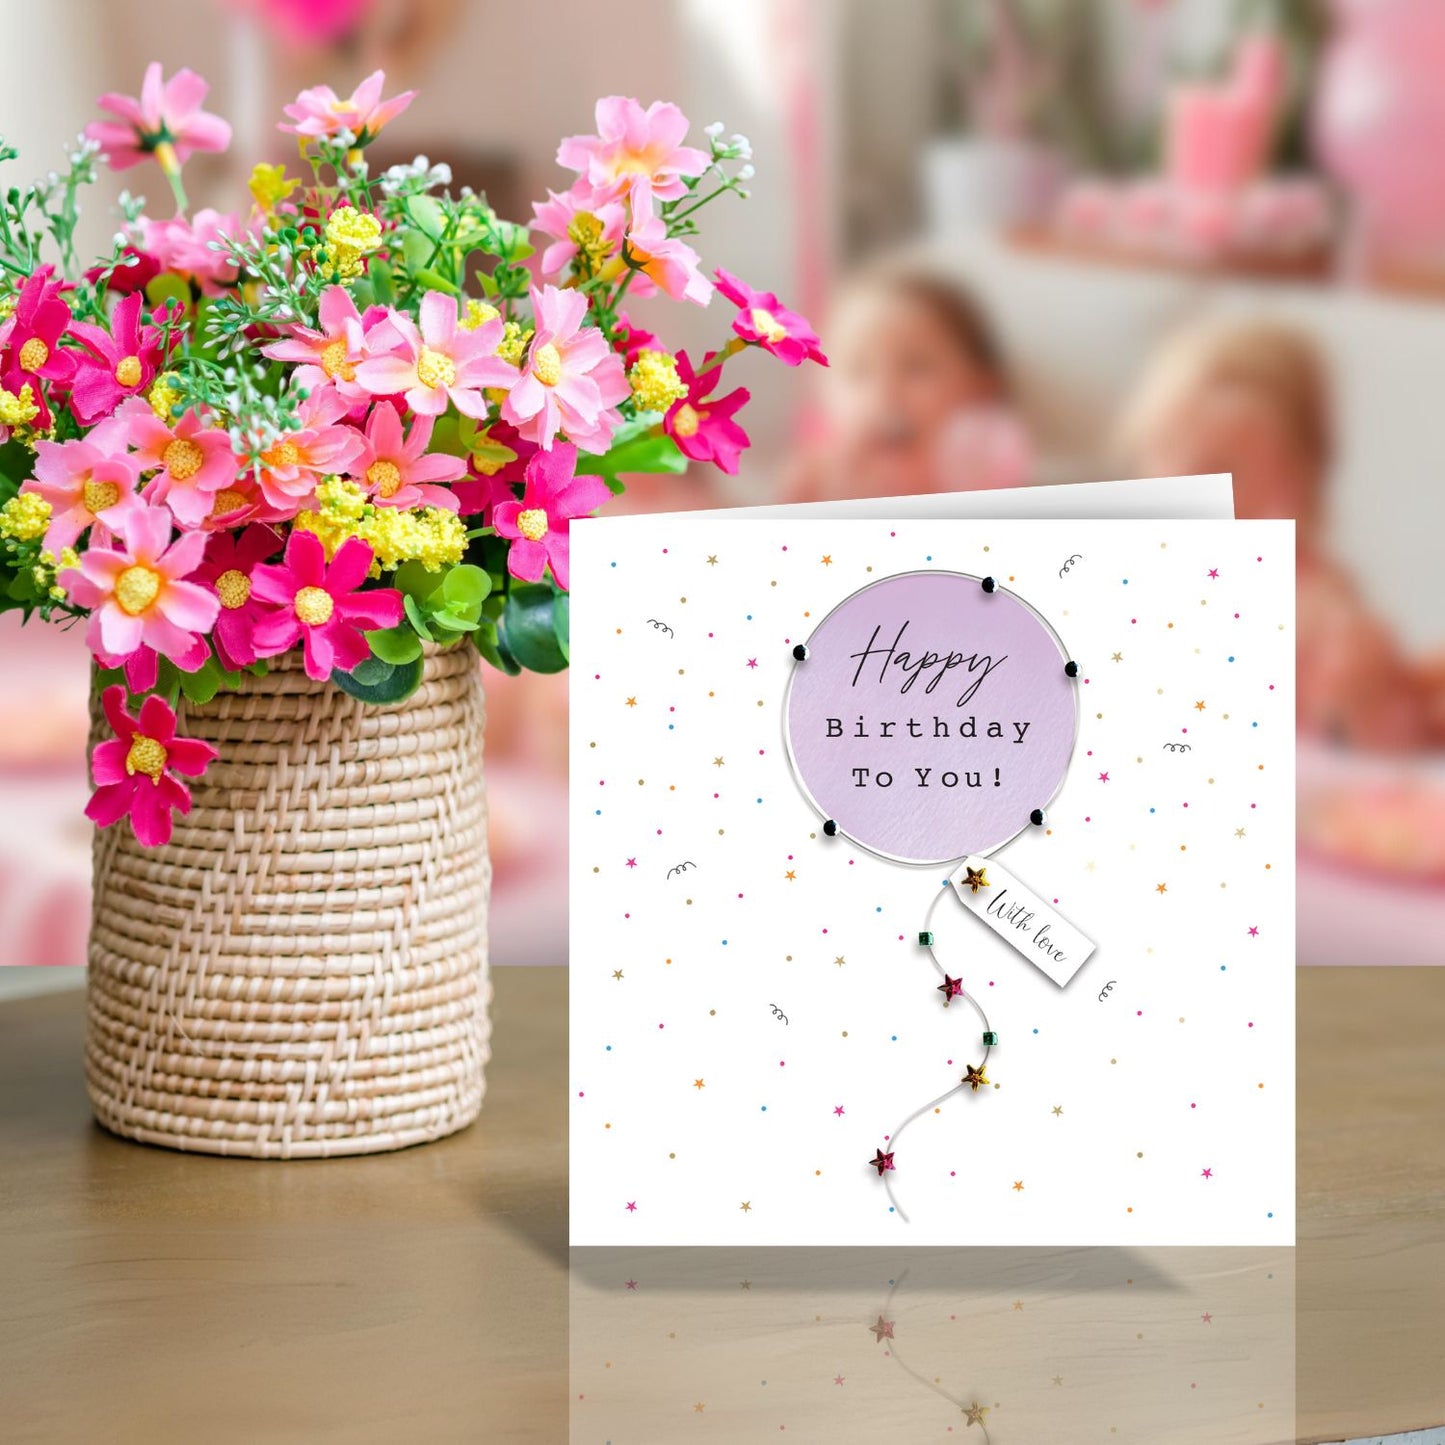 Happy Birthday To You! Magical, Bubbly Fun! Birthday Hand-Finished Greeting Card